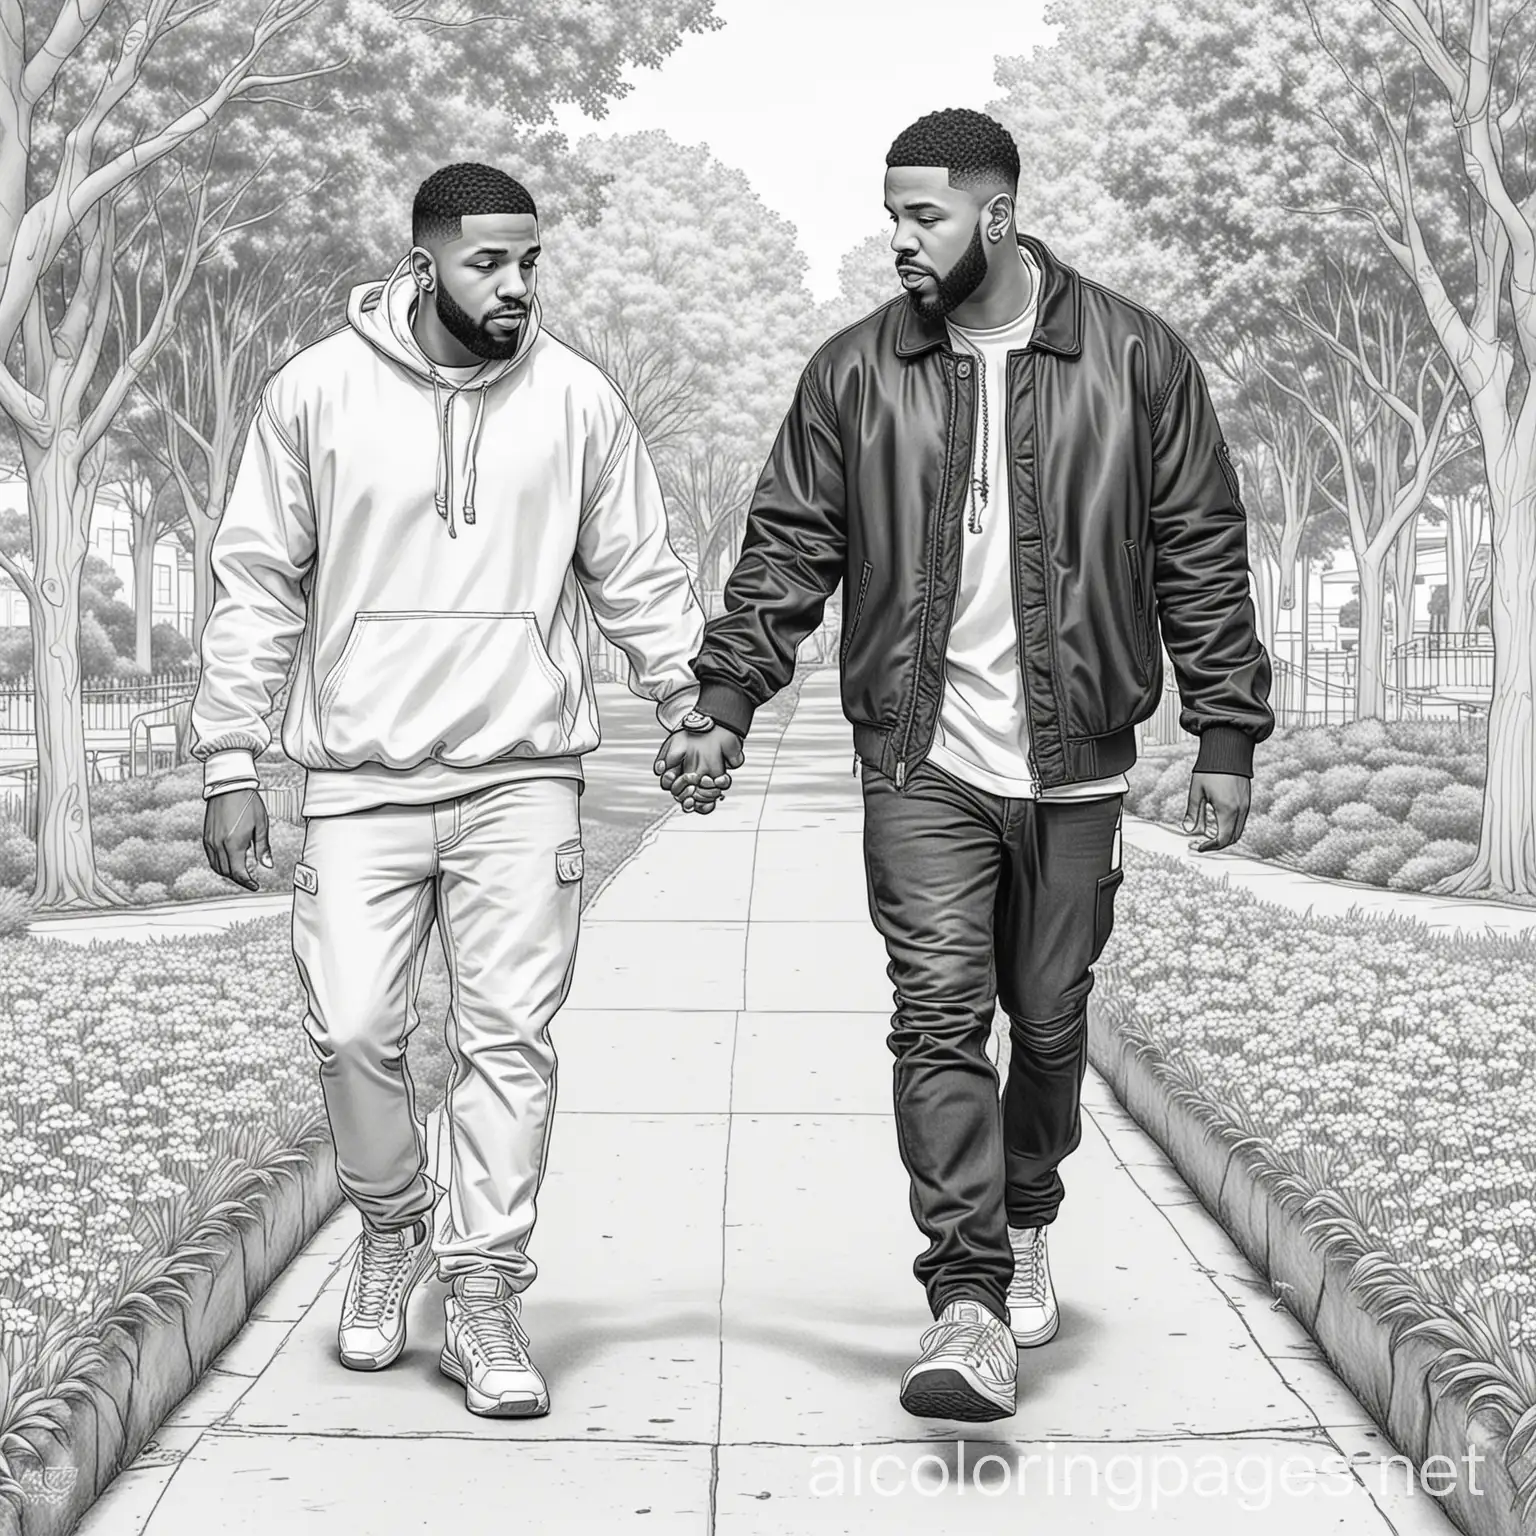 kendrick lamar and drake holding hands at the park, Coloring Page, black and white, line art, white background, Simplicity, Ample White Space. The background of the coloring page is plain white to make it easy for young children to color within the lines. The outlines of all the subjects are easy to distinguish, making it simple for kids to color without too much difficulty